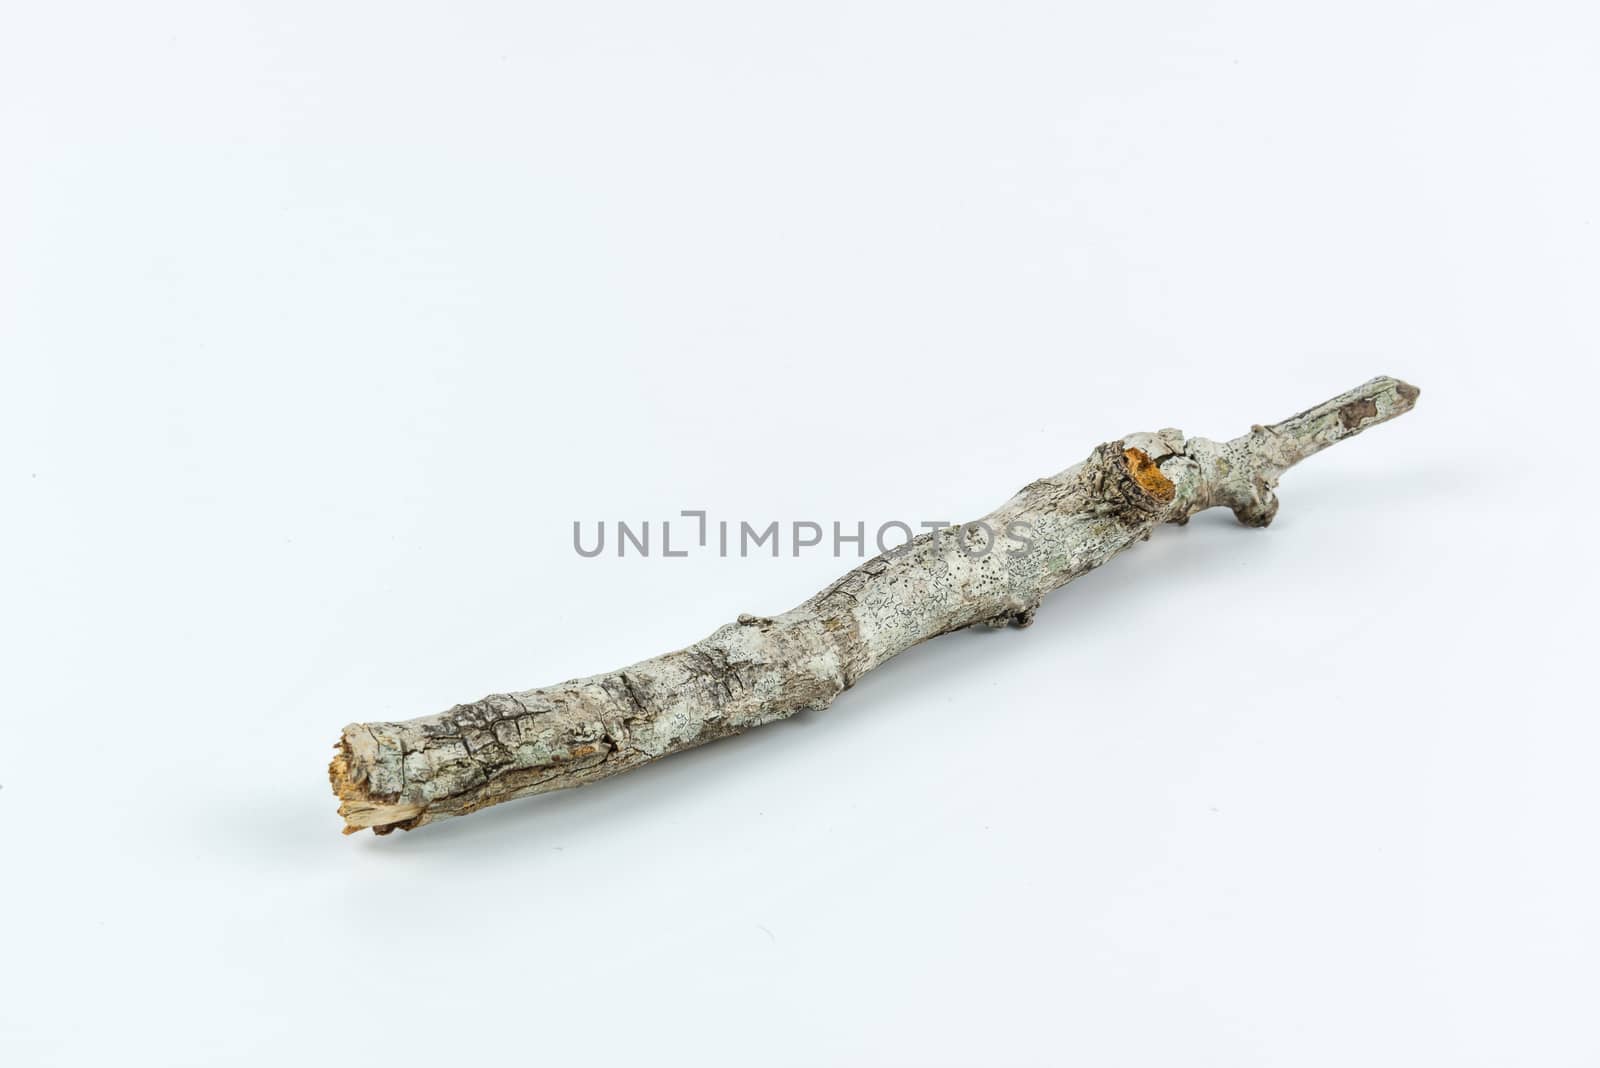 Pile of dry twigs on white background	